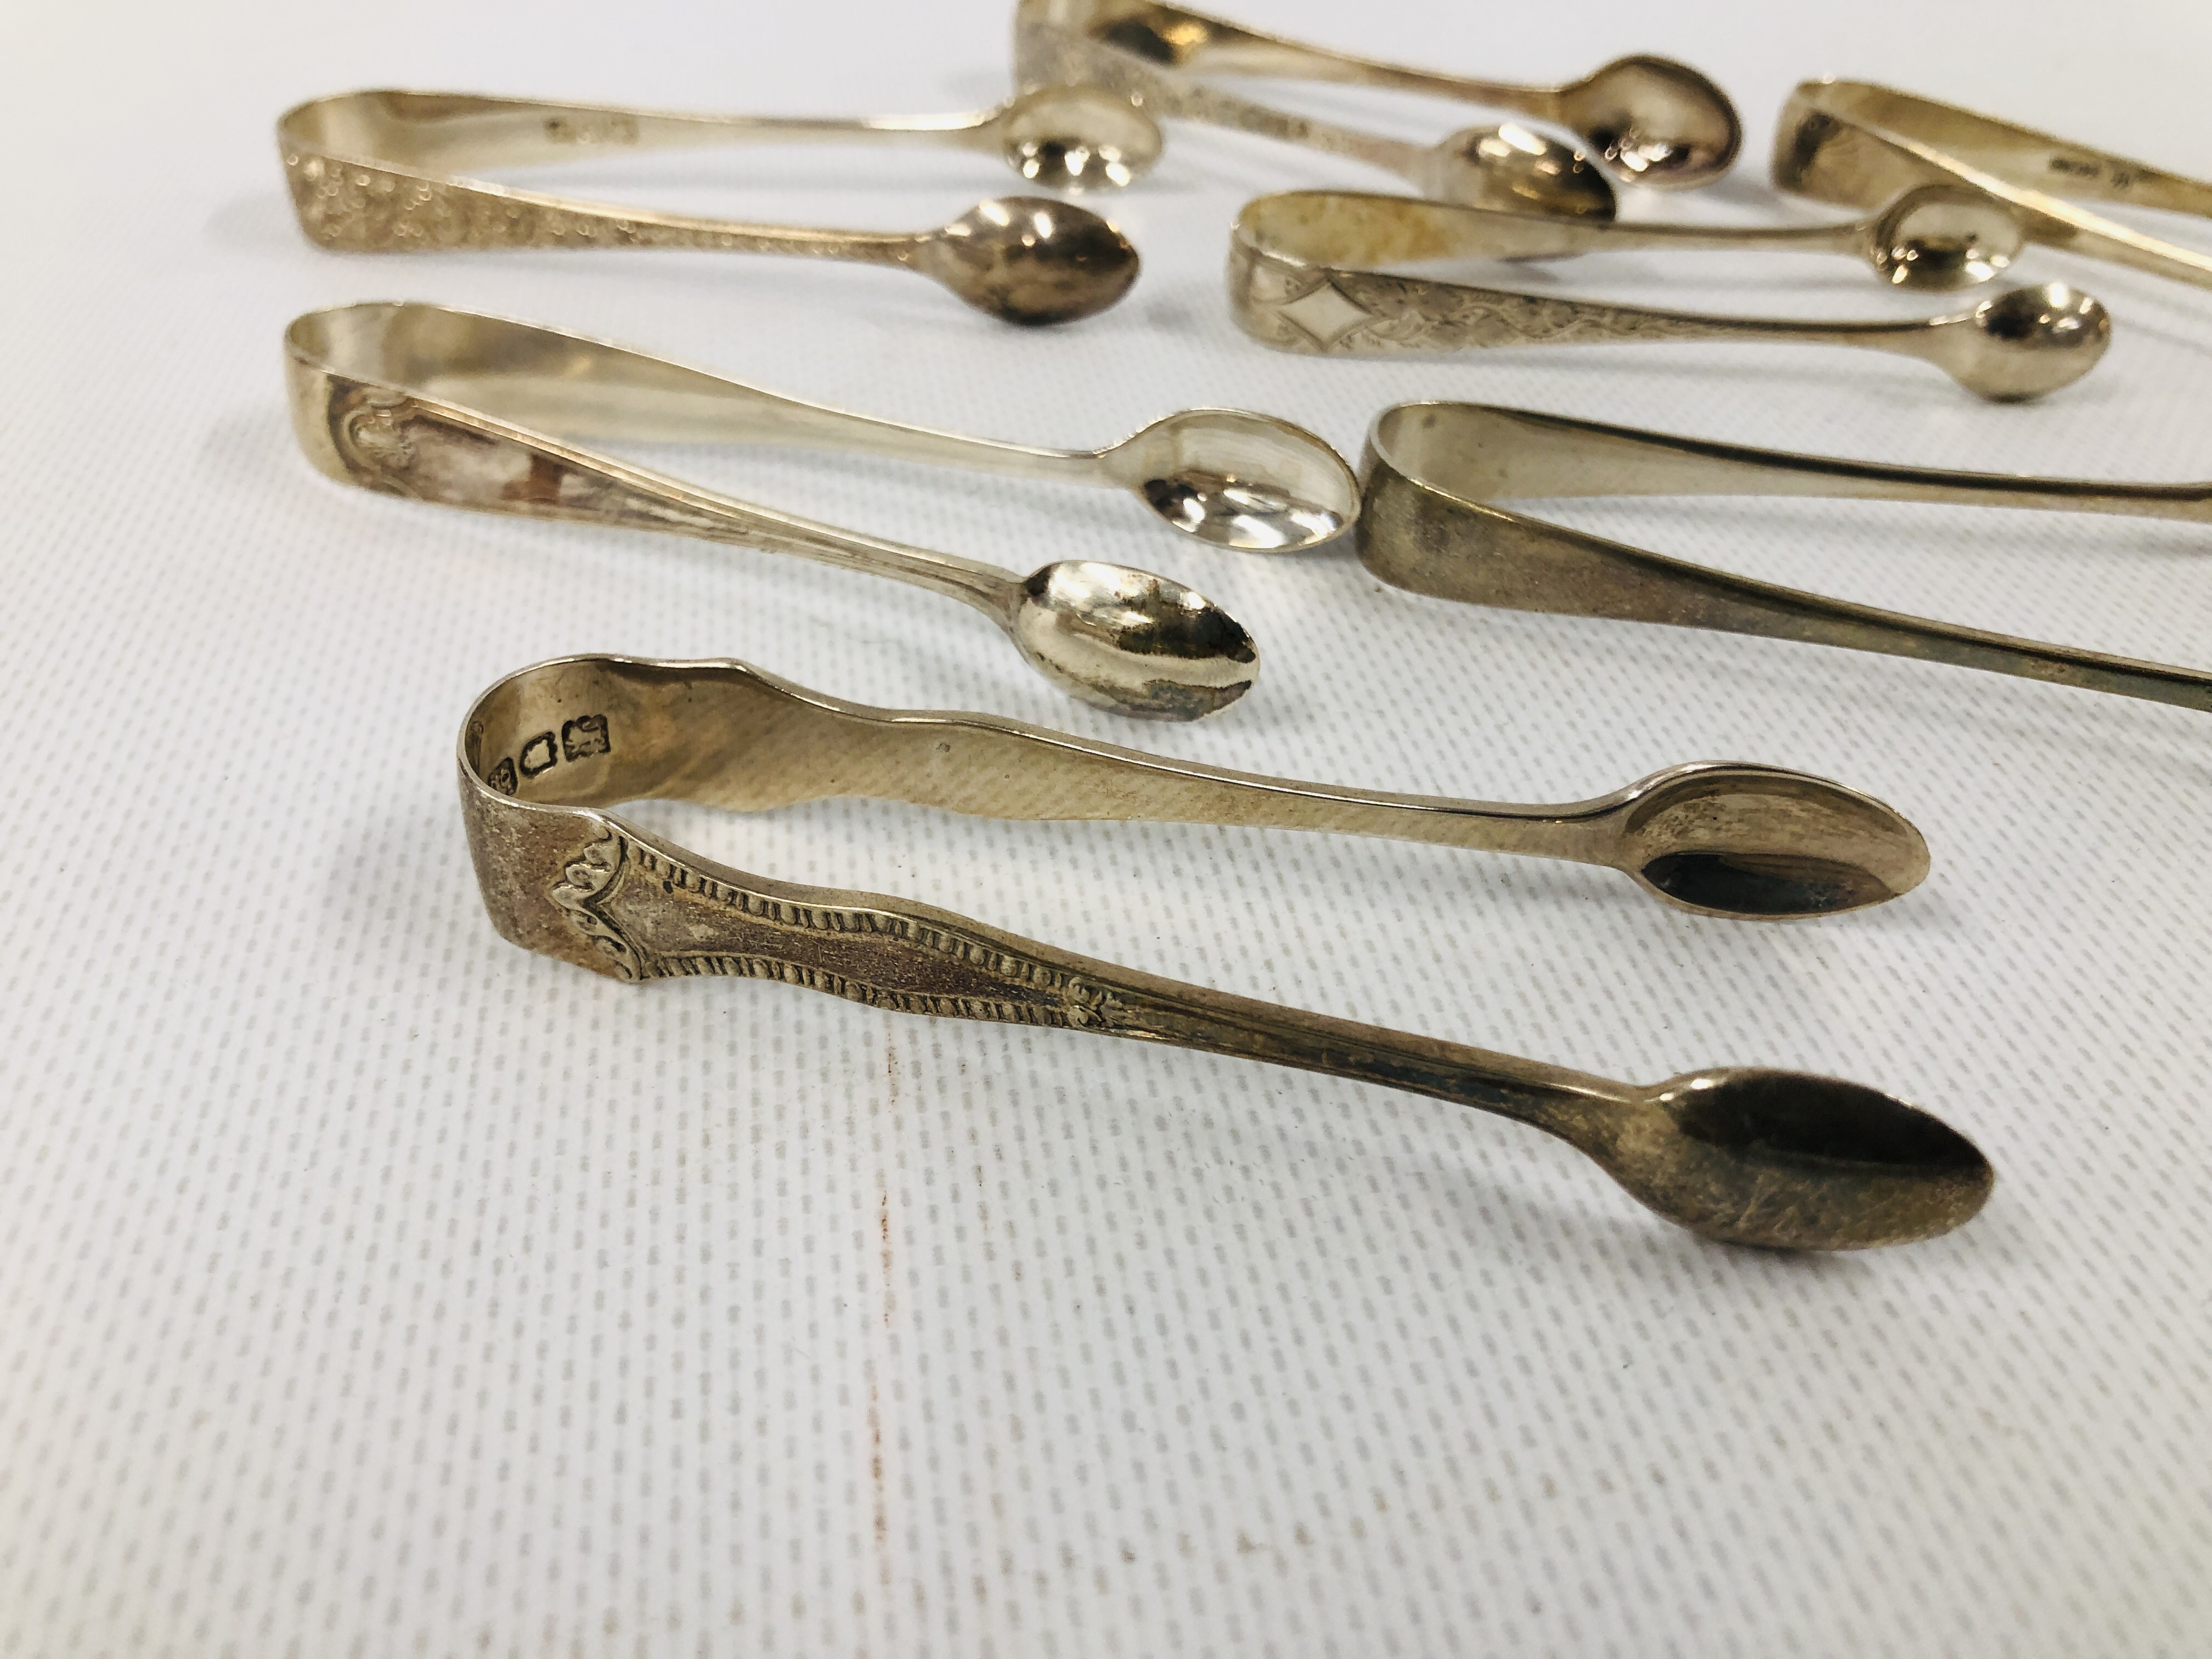 GROUP OF 8 VARIOUS SILVER SUGAR NIPS, VARIOUS MAKERS AND ASSAYS. - Image 2 of 7